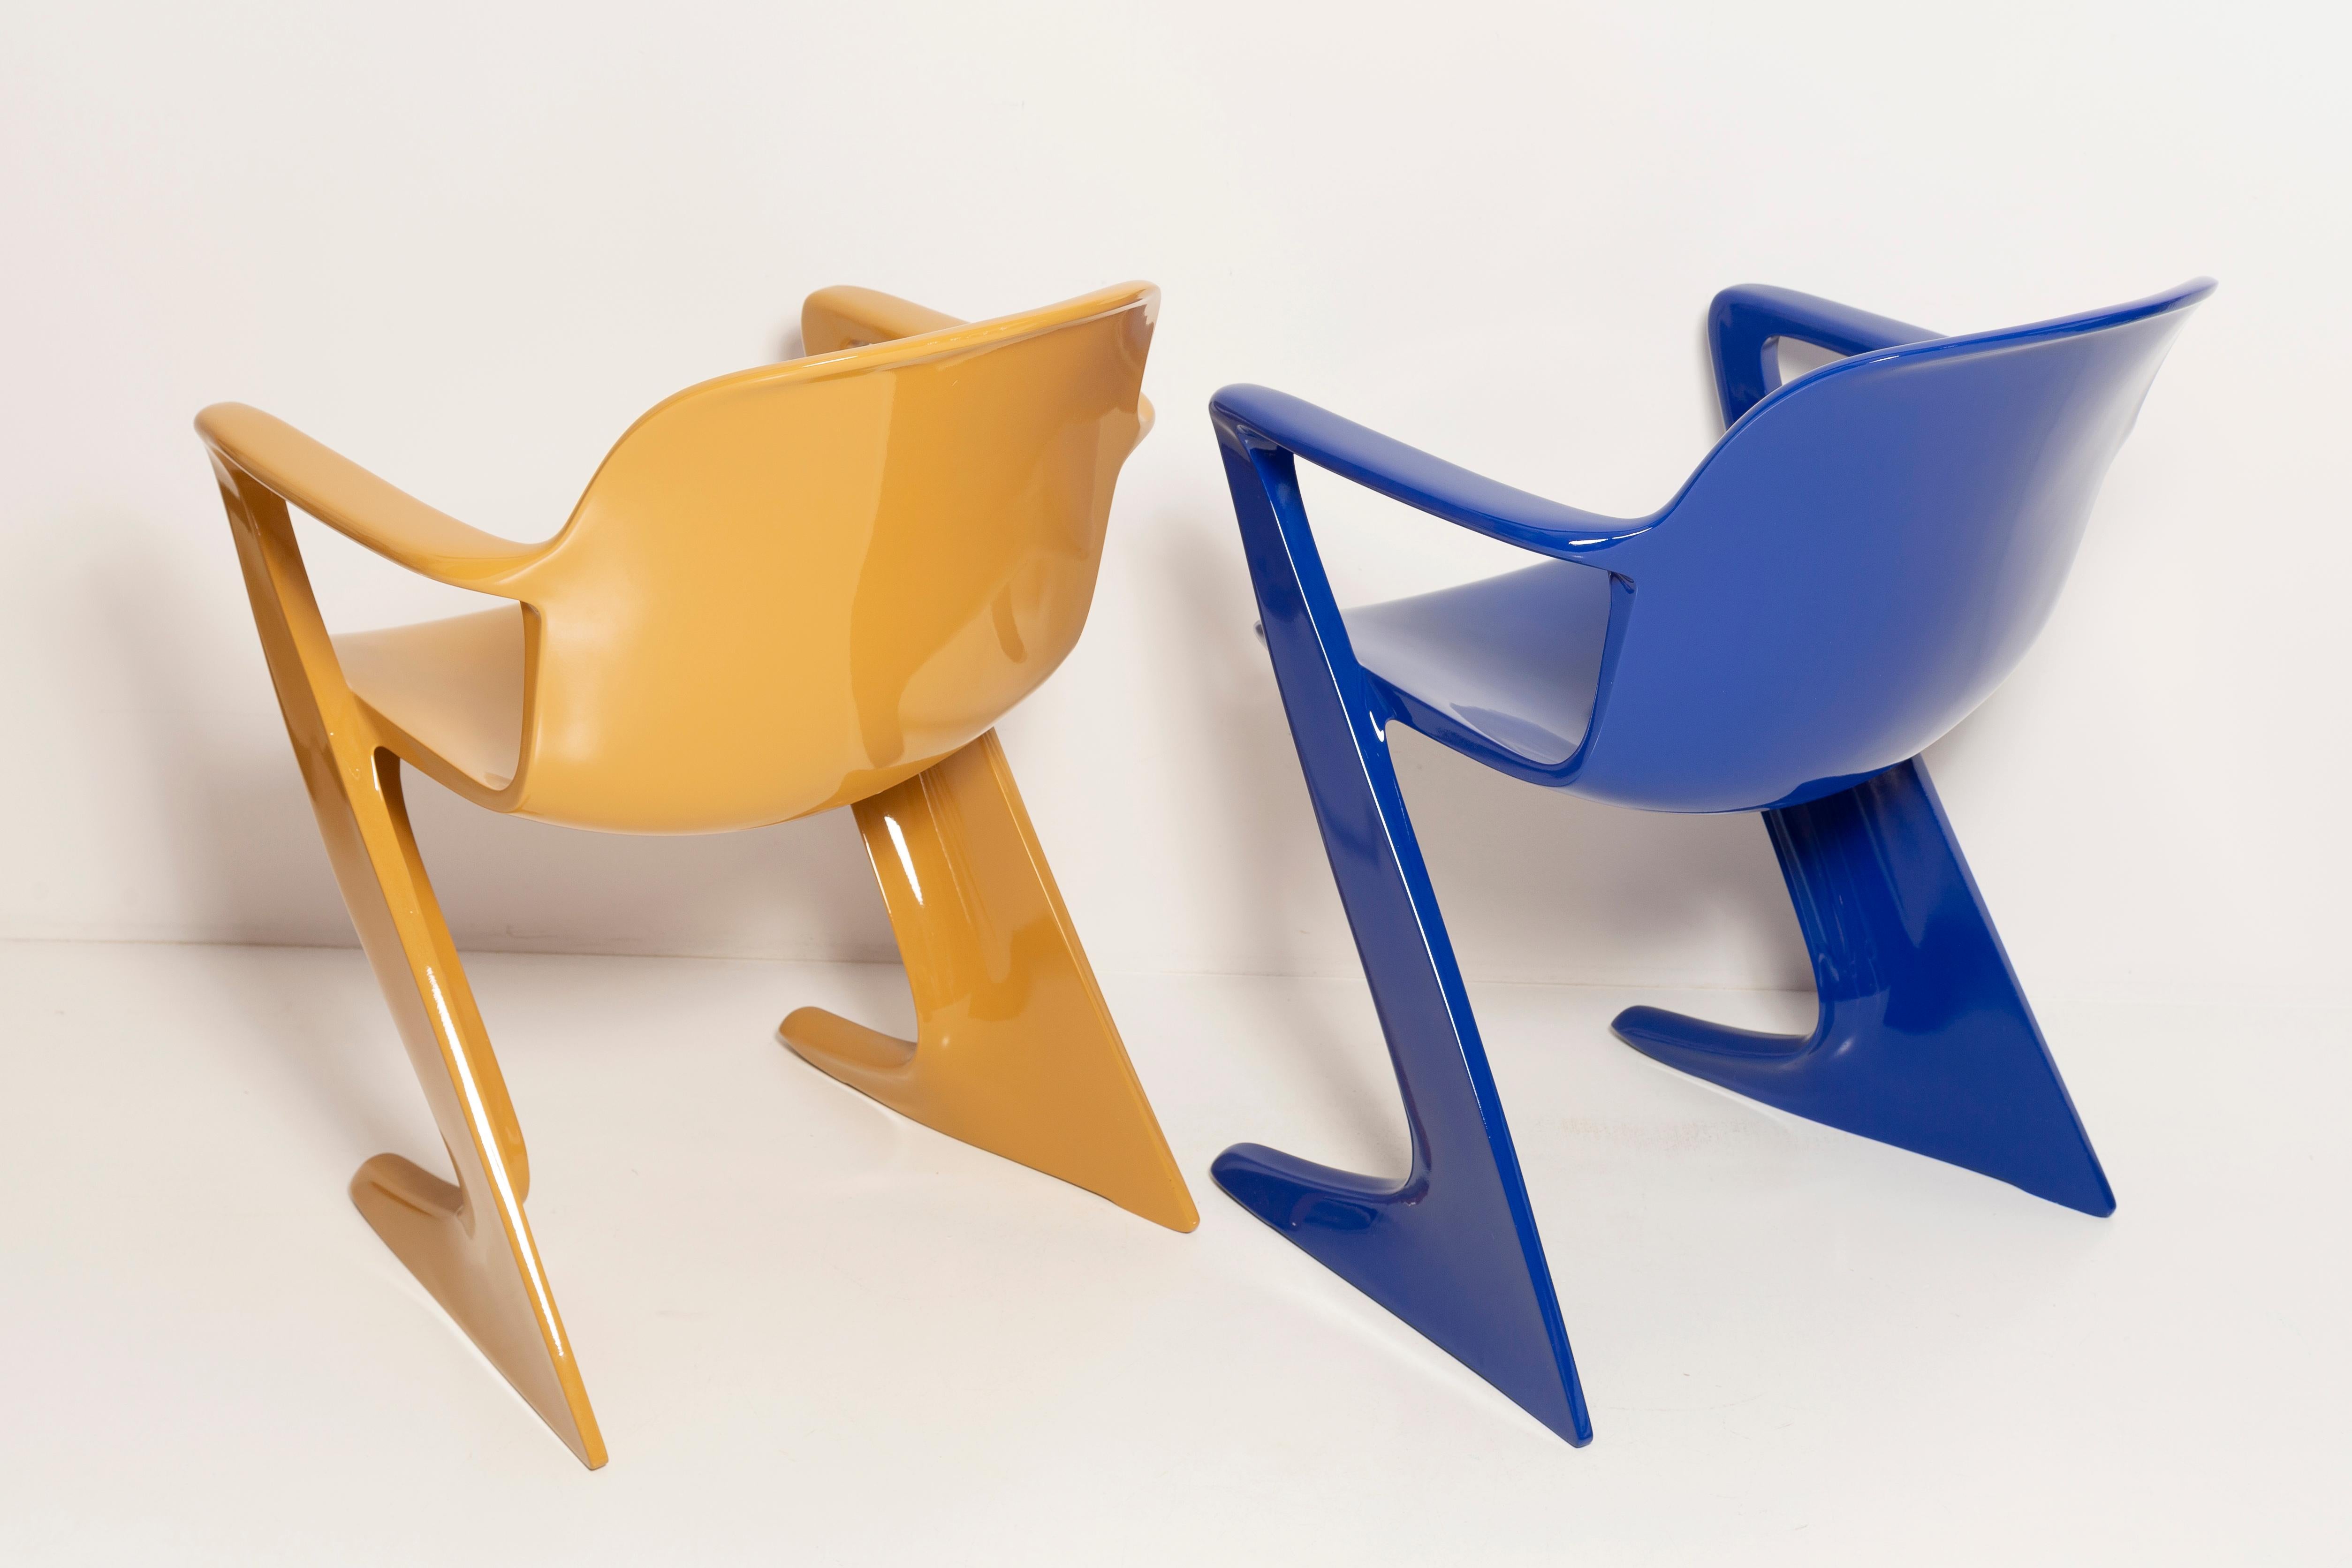 Two Mid-Century Mustard and Blue Kangaroo Chairs Ernst Moeckl, Germany, 1968 For Sale 2